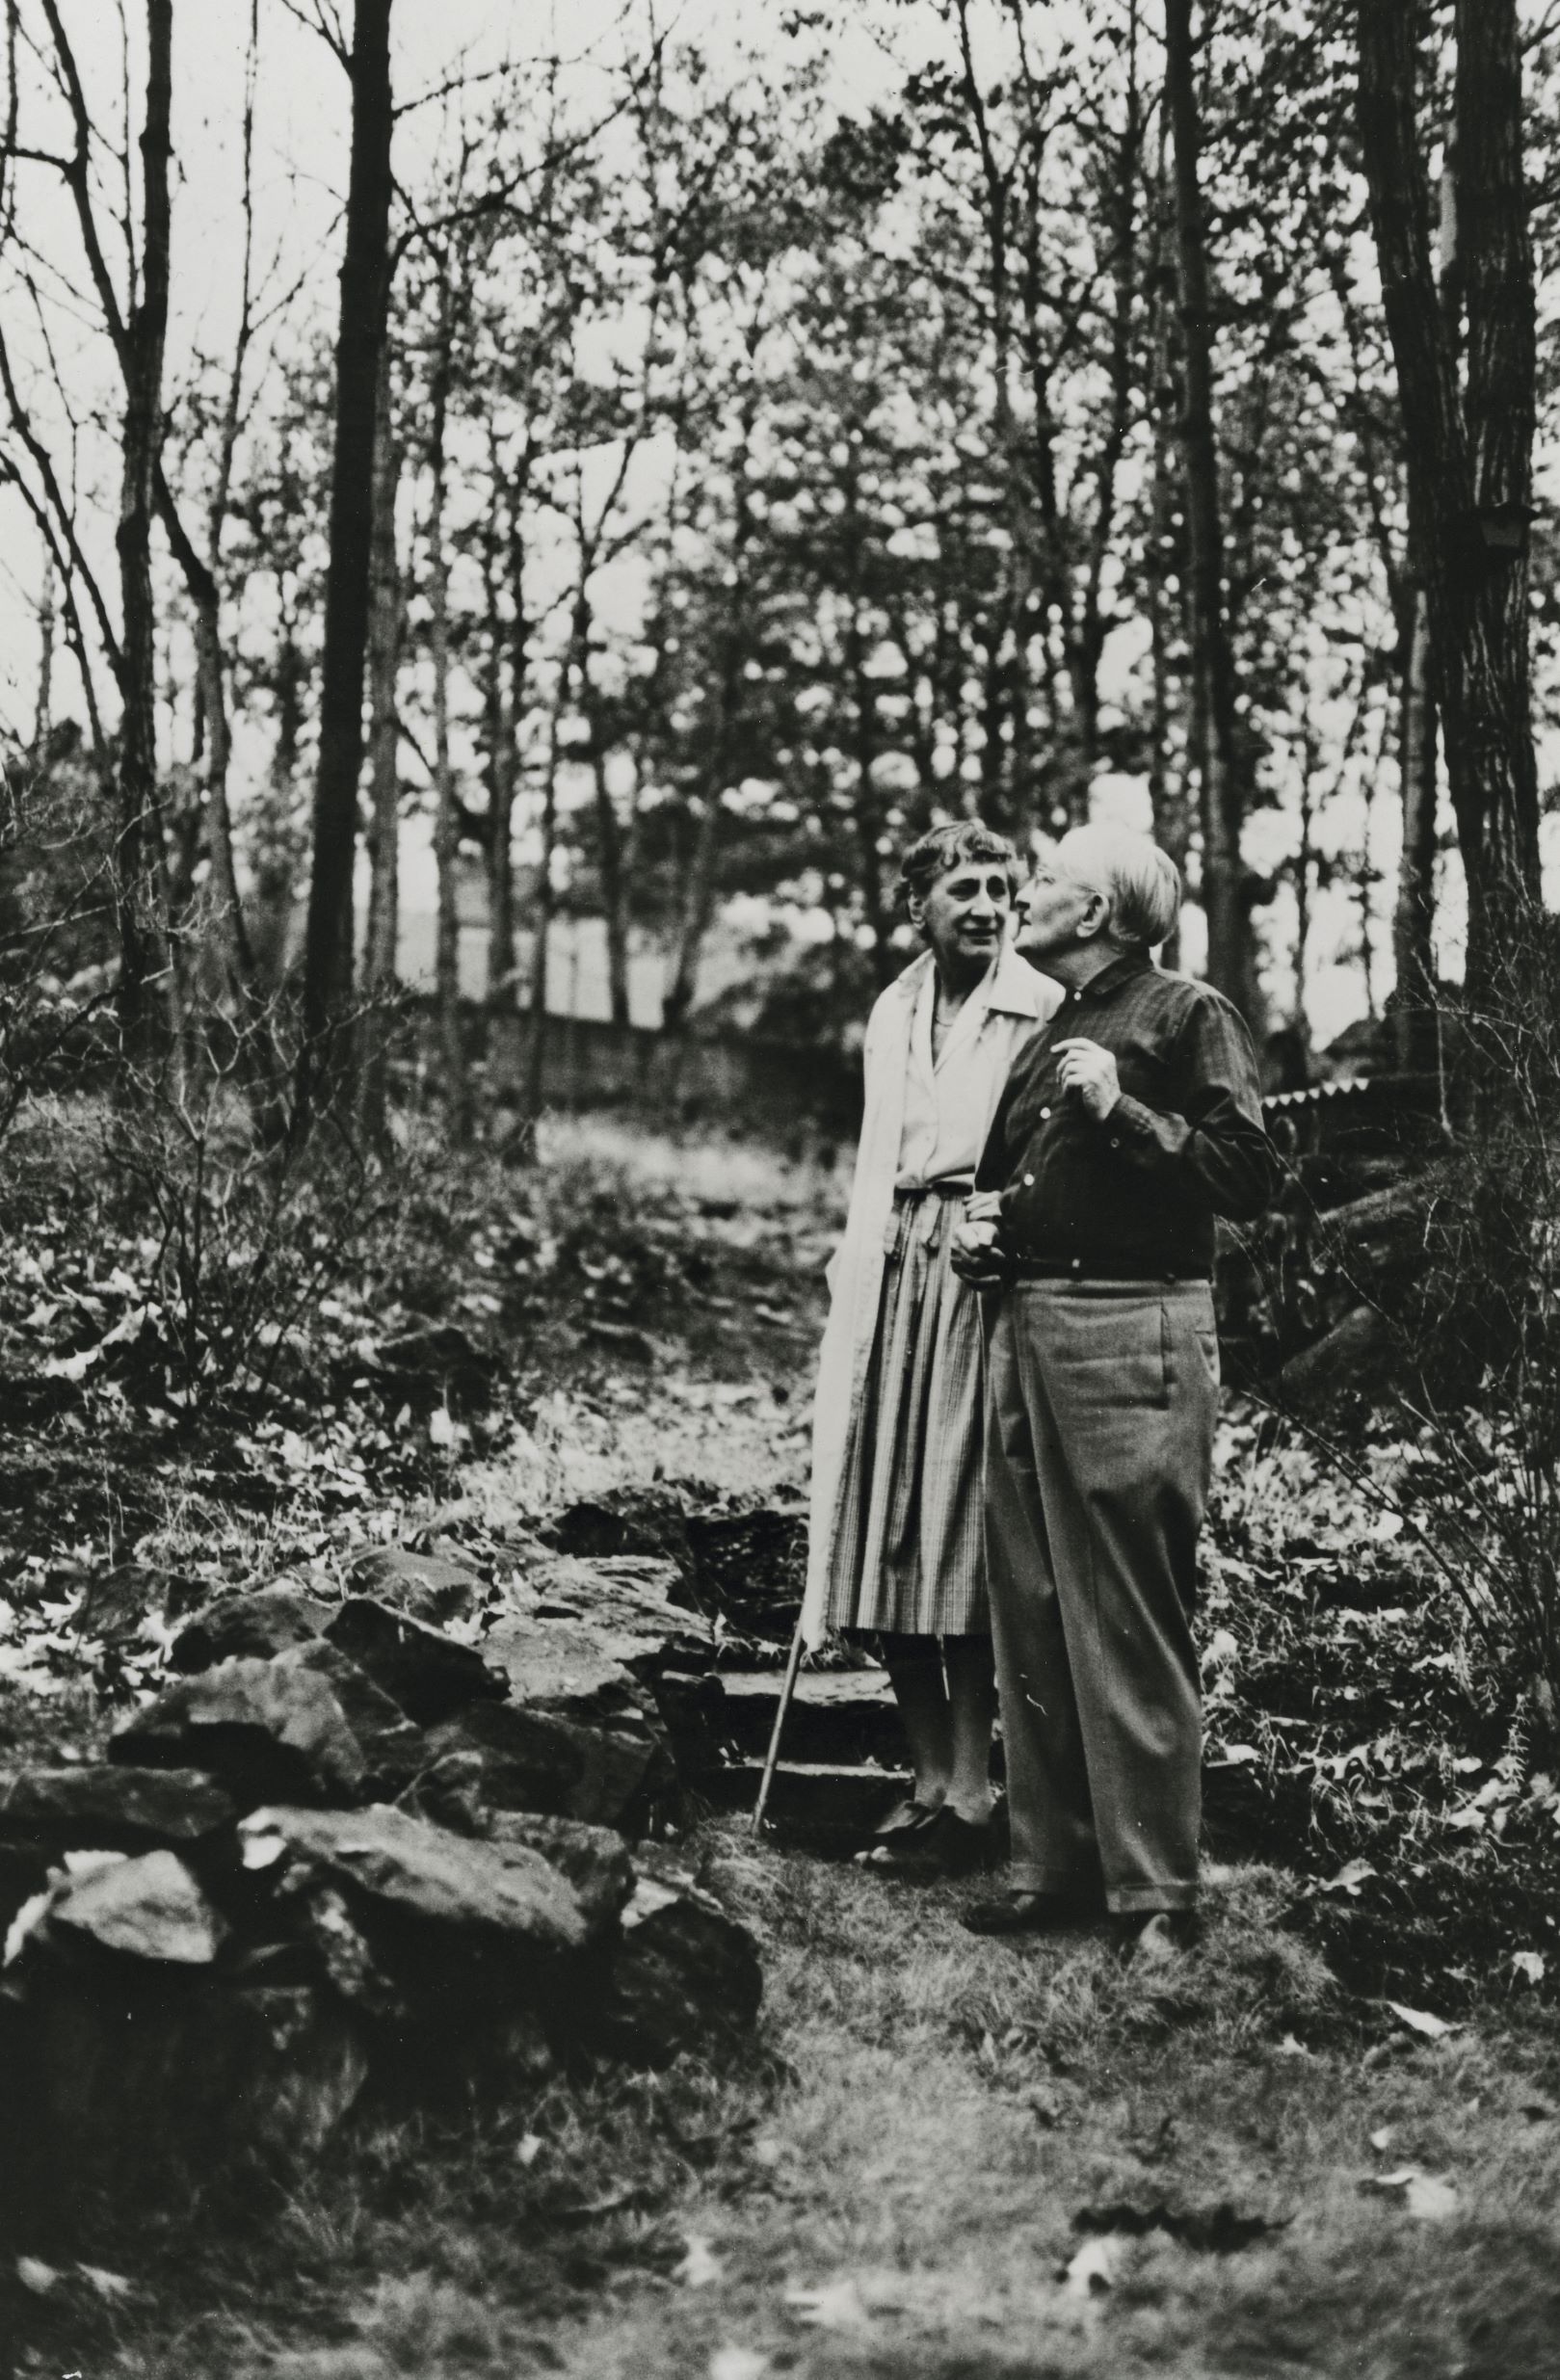 Anni and Josef Albers in the garden of their home at 8 North Forest Circle, New Haven, Connecticut, c. 1967. © Sedat Pakay. Courtesy of the Josef and Anni Albers Foundation